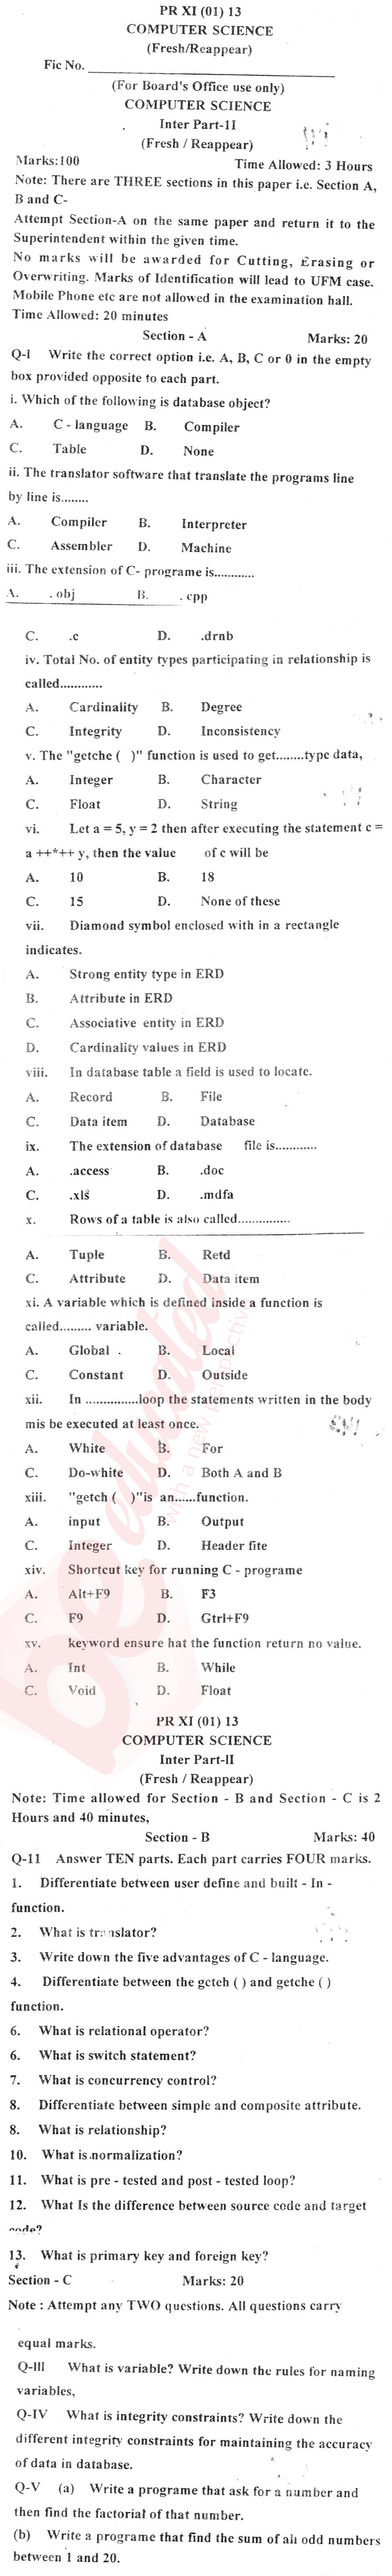 Computer Science ICS Part 2 Past Paper Group 1 BISE Bannu 2013